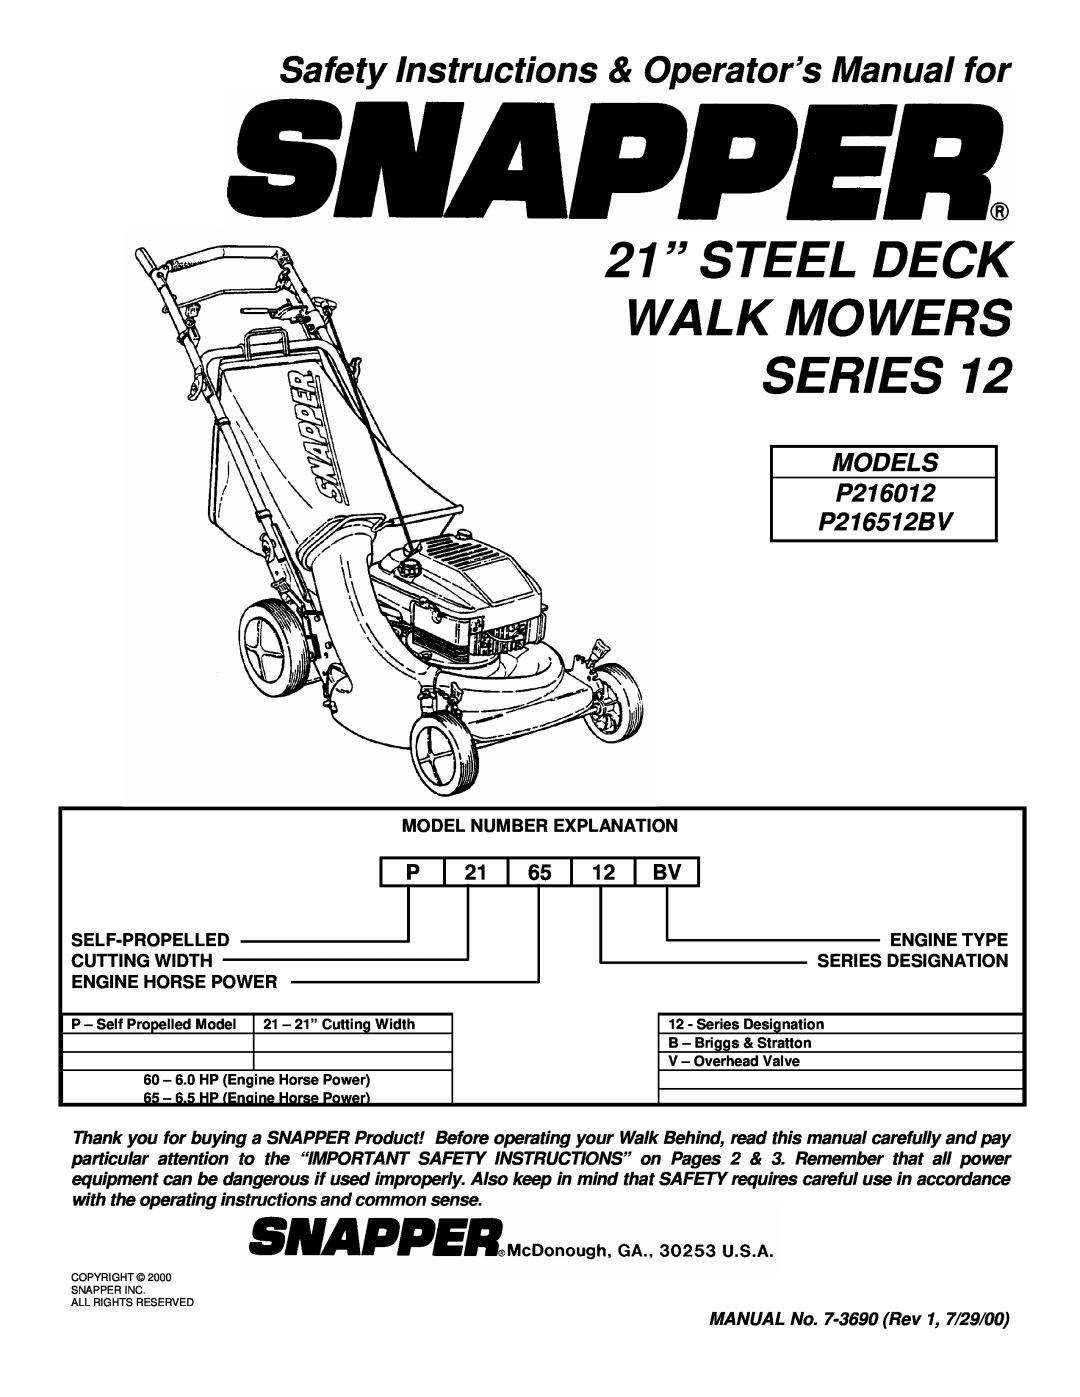 Snapper P216512BV, P216012, WP216512BV important safety instructions 21” STEEL DECK WALK MOWERS SERIES 